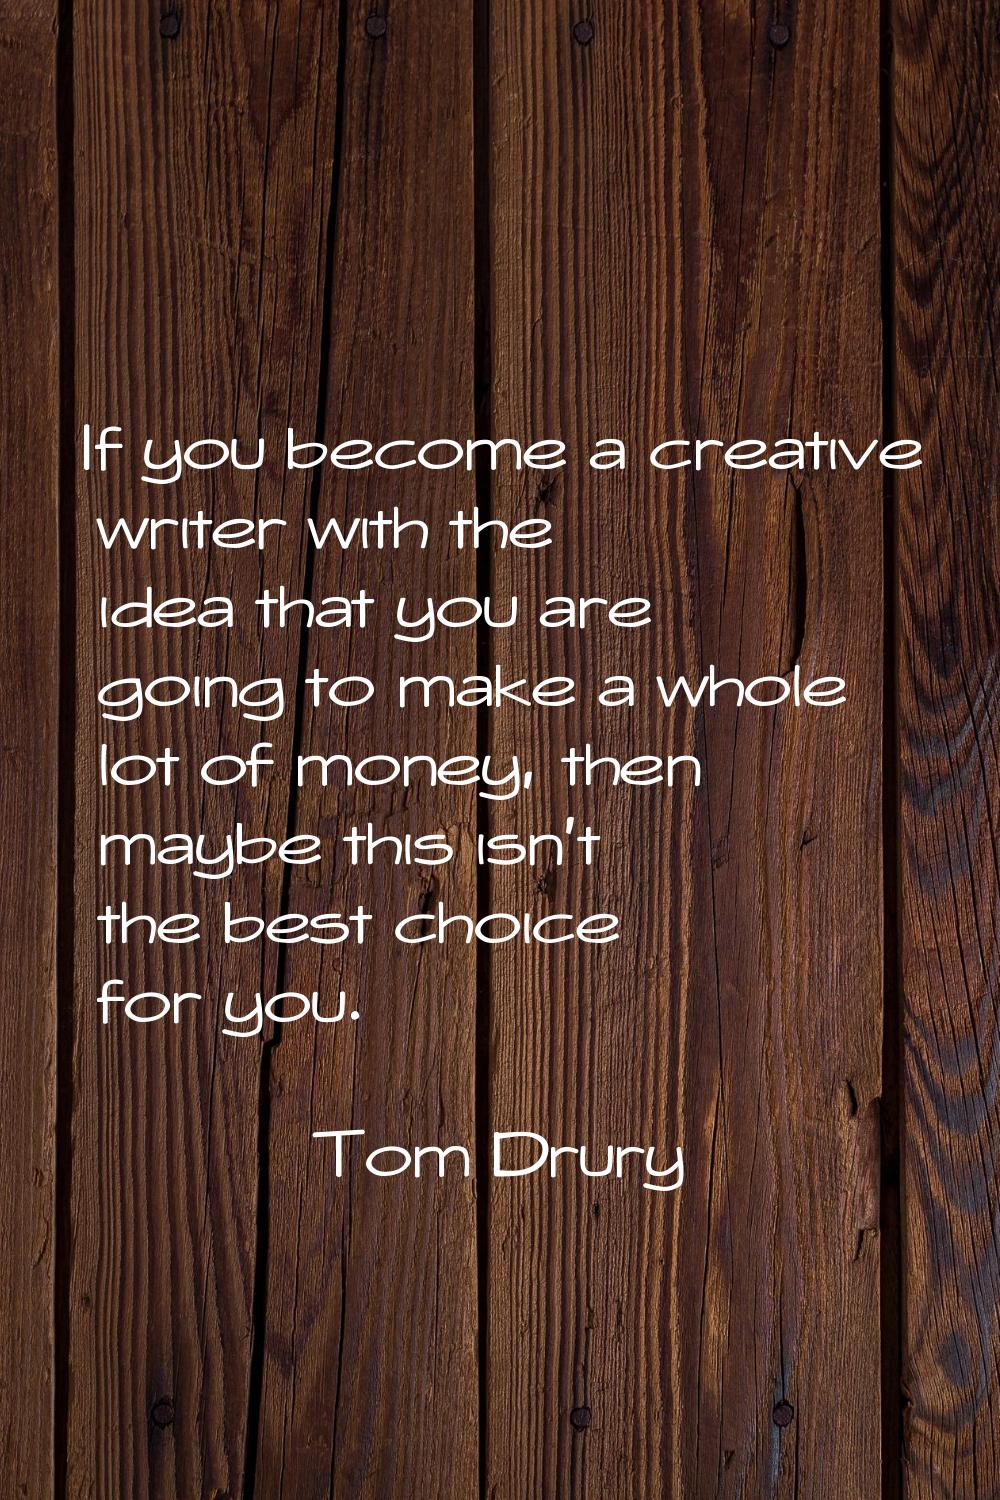 If you become a creative writer with the idea that you are going to make a whole lot of money, then